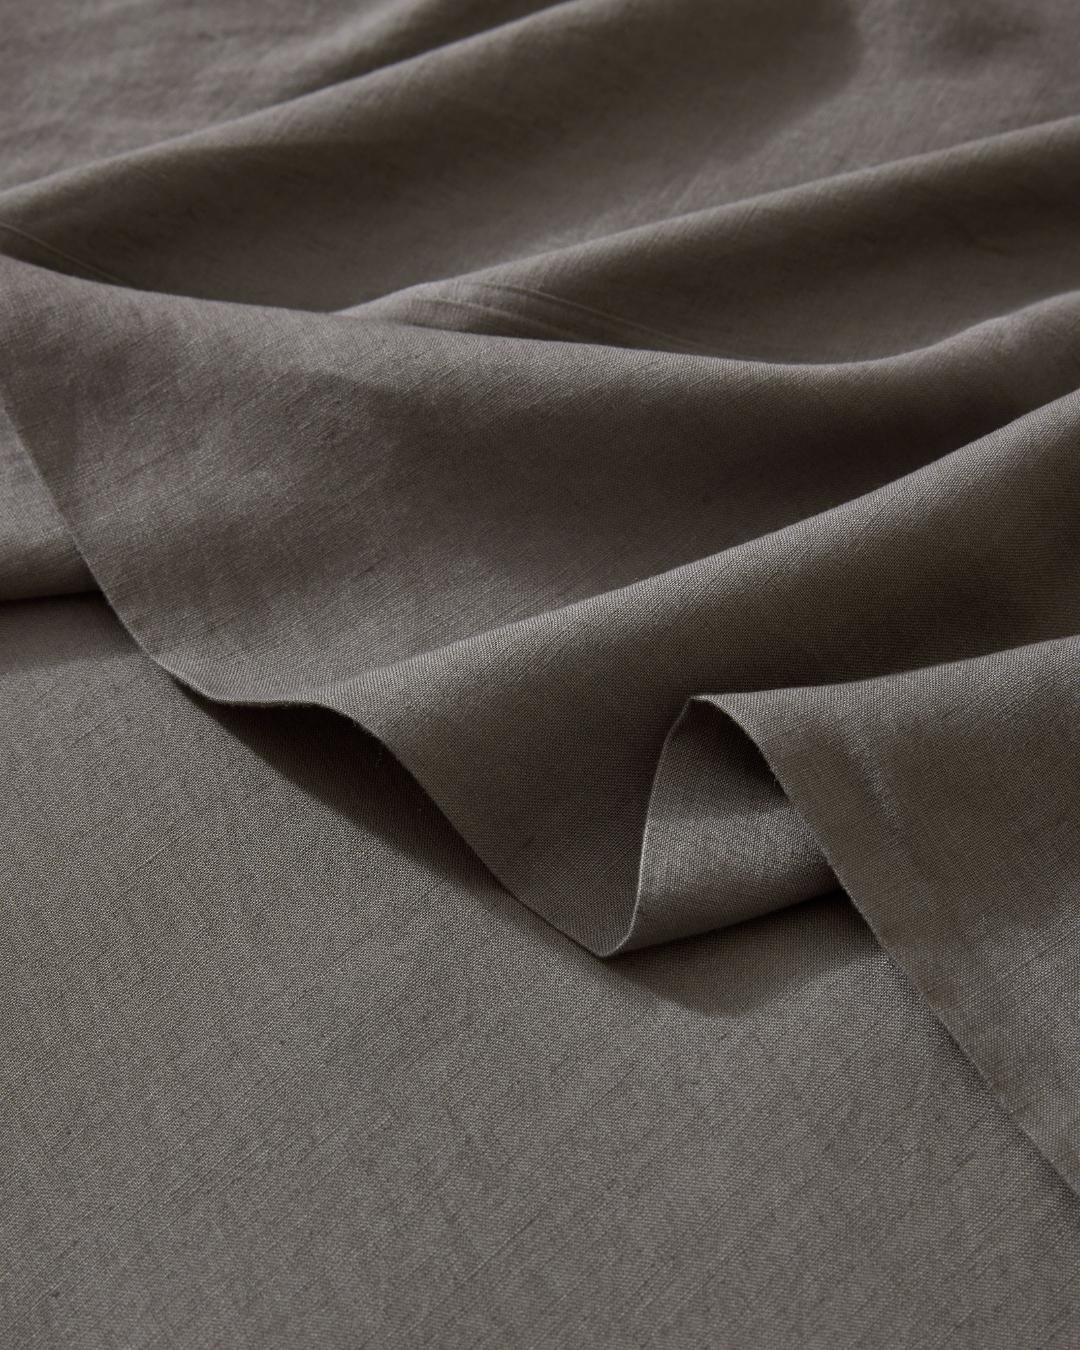 Crafted from the highest quality French Flax Linen. The Charcoal colourway is perfect for those wanting a mid-toned, sophisticated grey to add depth, or match a dark or cool-toned bedroom. 